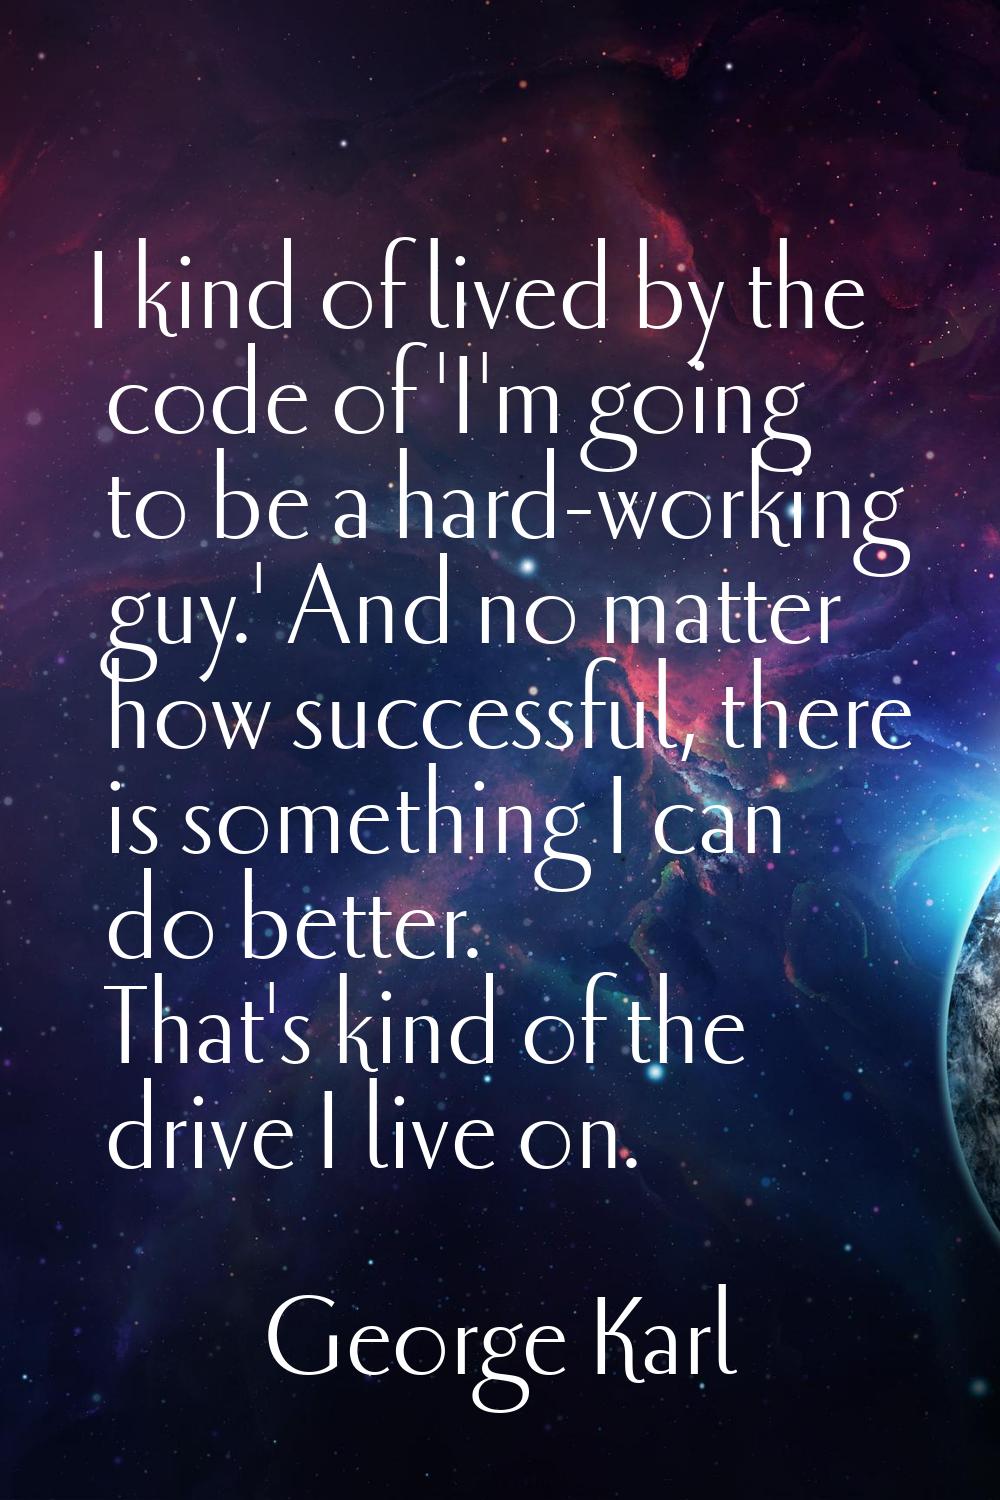 I kind of lived by the code of 'I'm going to be a hard-working guy.' And no matter how successful, 